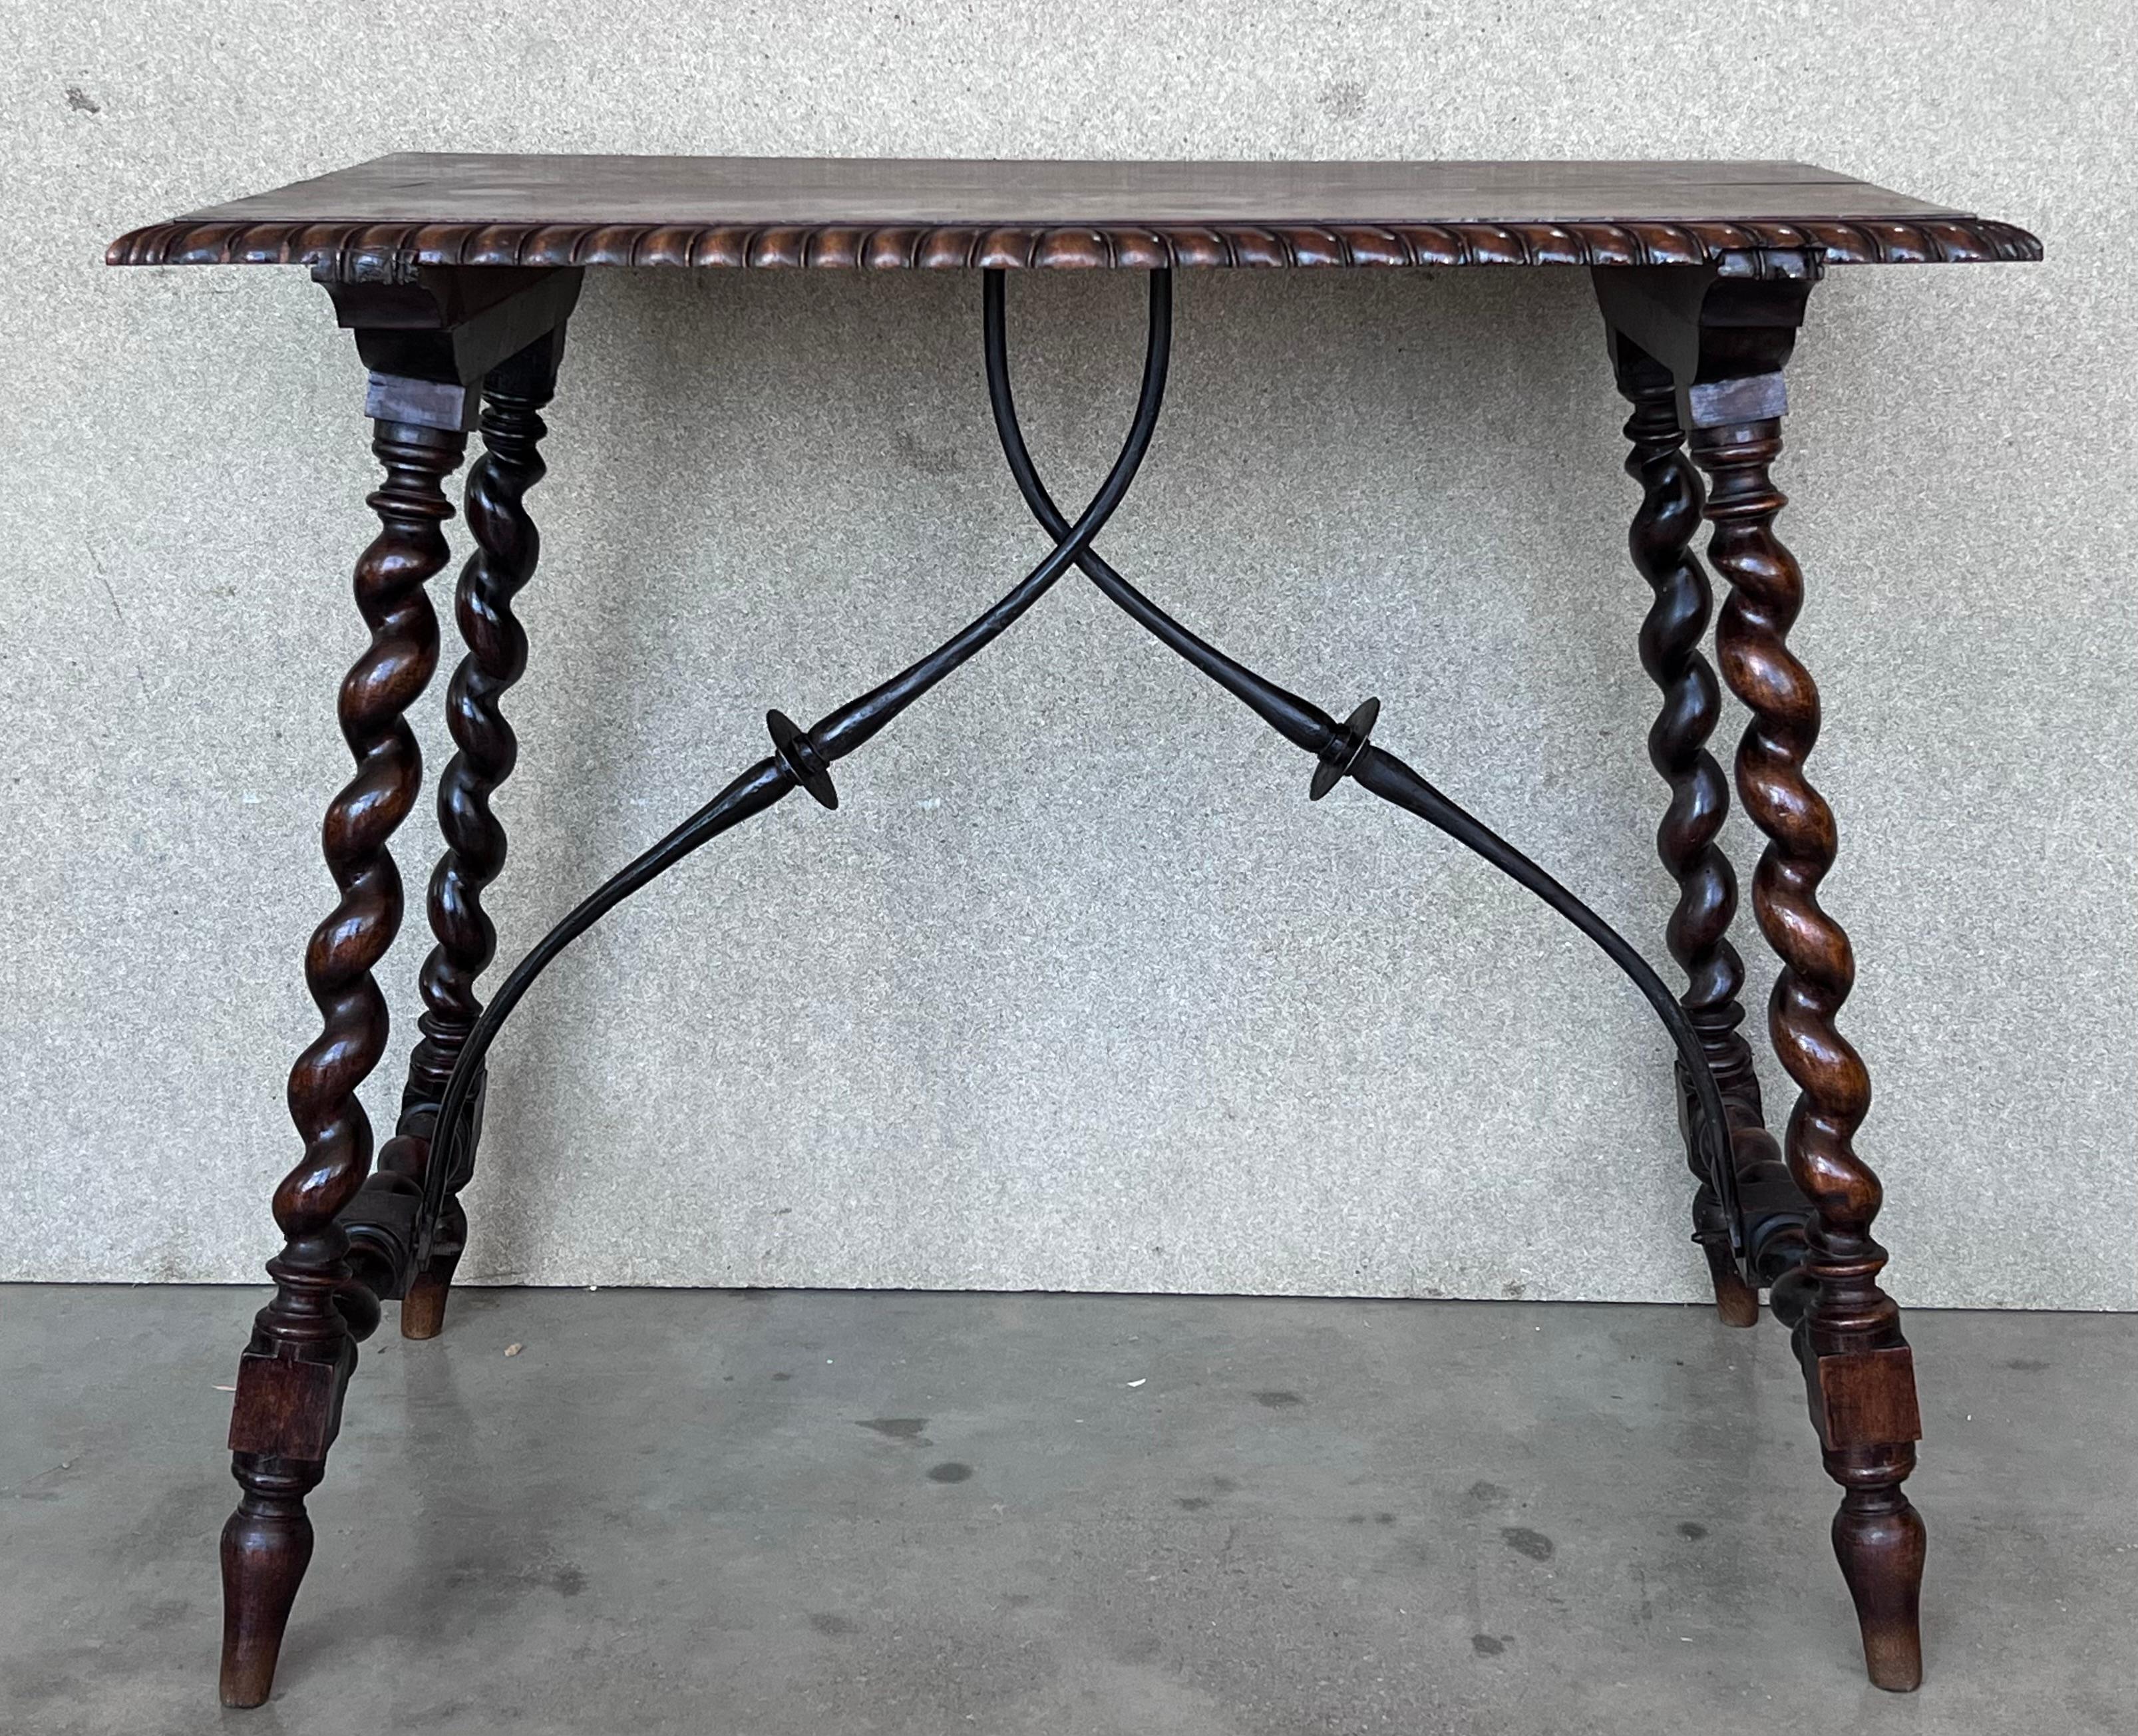 19th Century 19th Spanish Side Table with Cared Turned Legs and Iron Stretcher